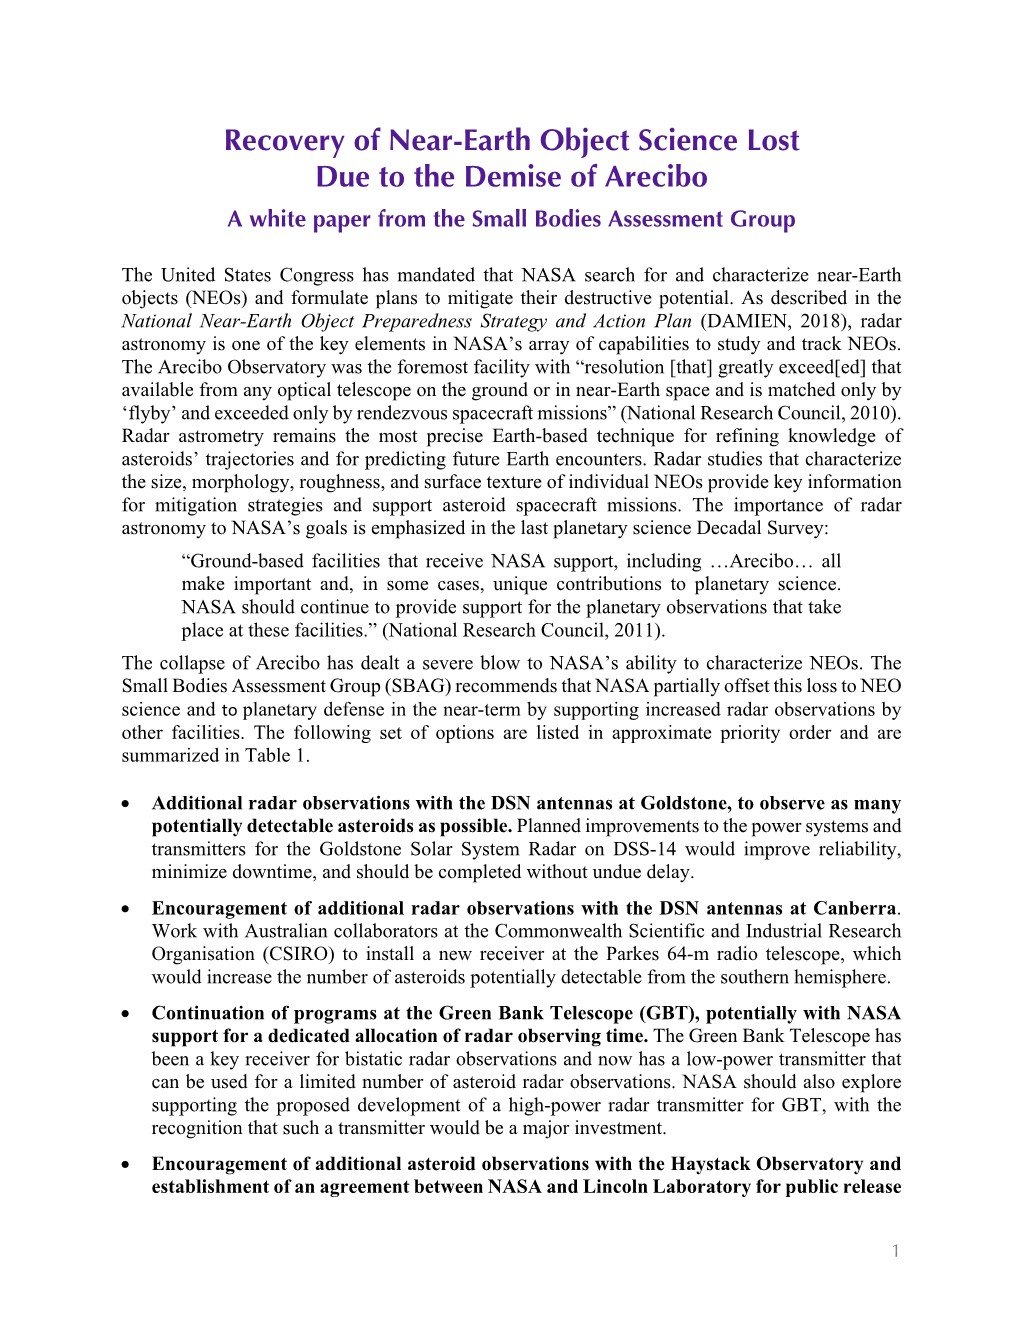 Recovery of Near-Earth Object Science Lost Due to the Demise of Arecibo a White Paper from the Small Bodies Assessment Group